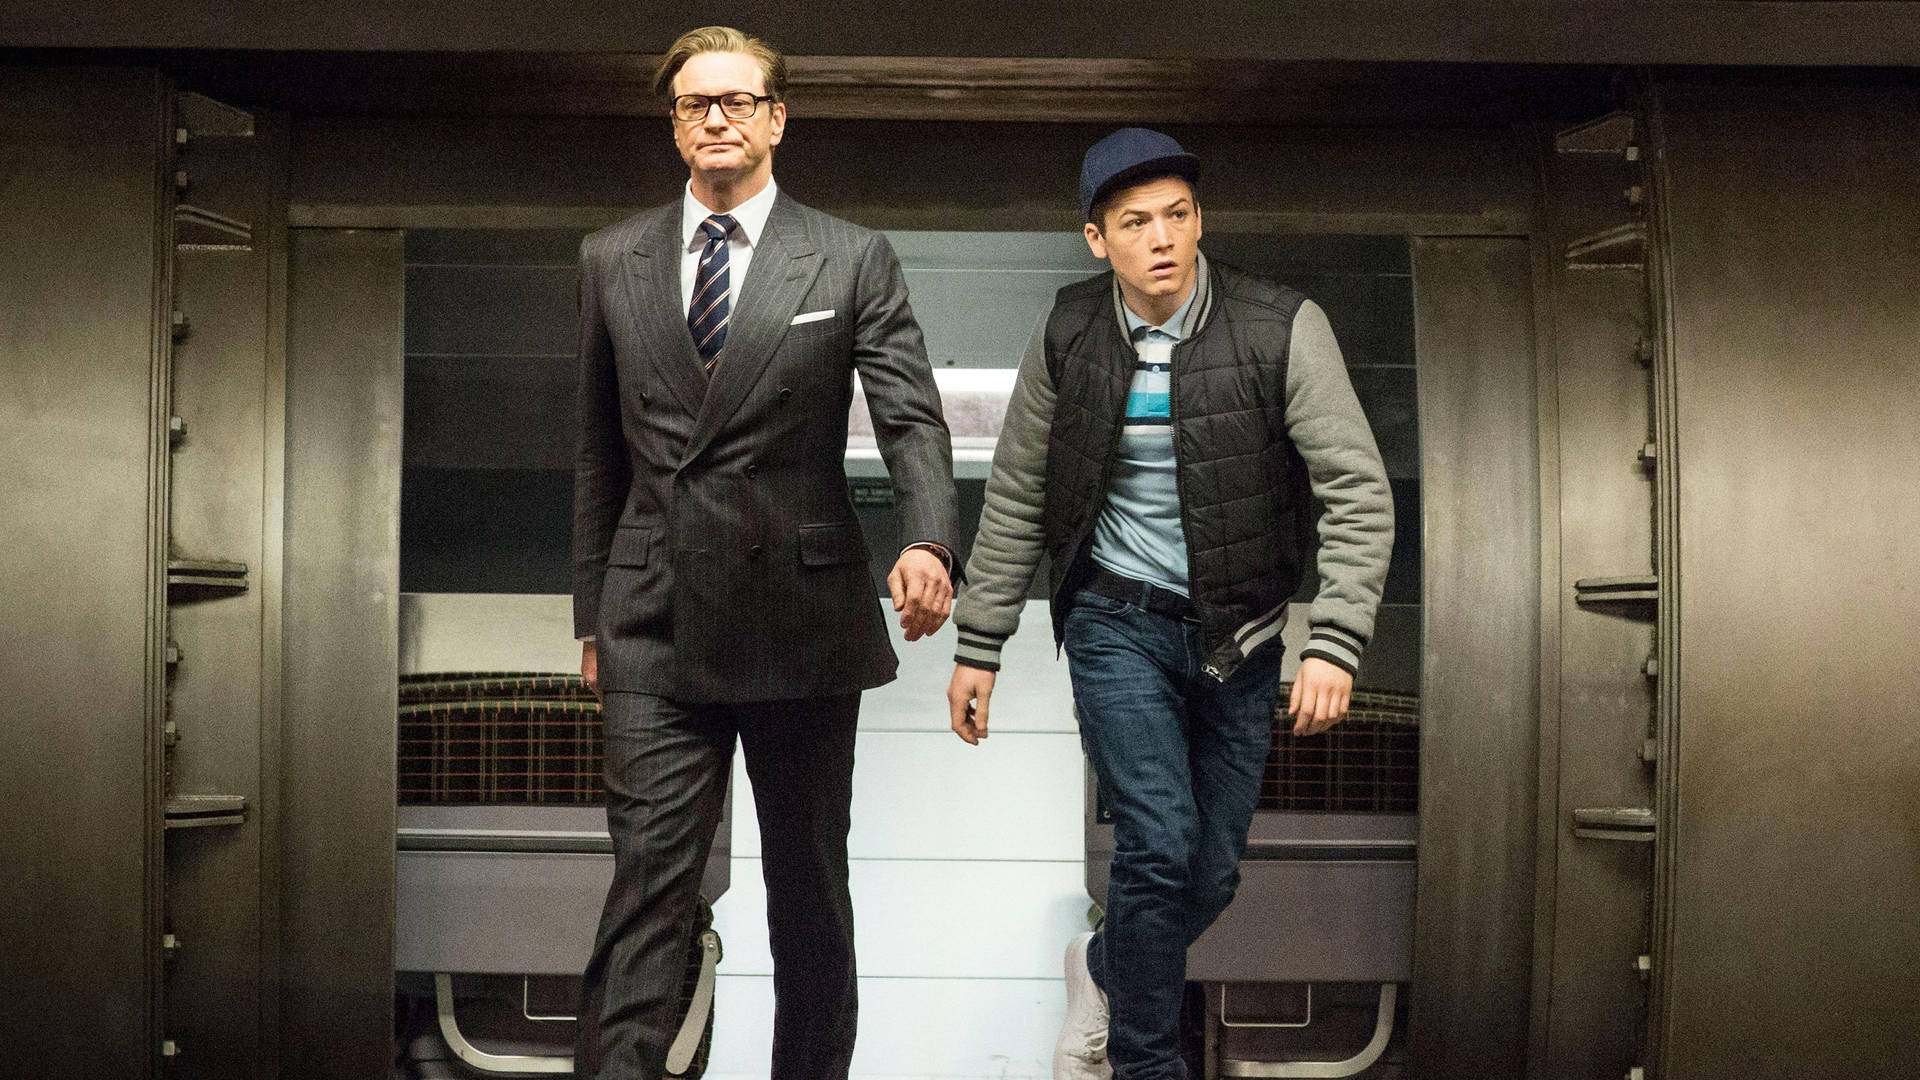 A Riveting Scene from Kingsman: Eggsy and Galahad in Action Wallpaper